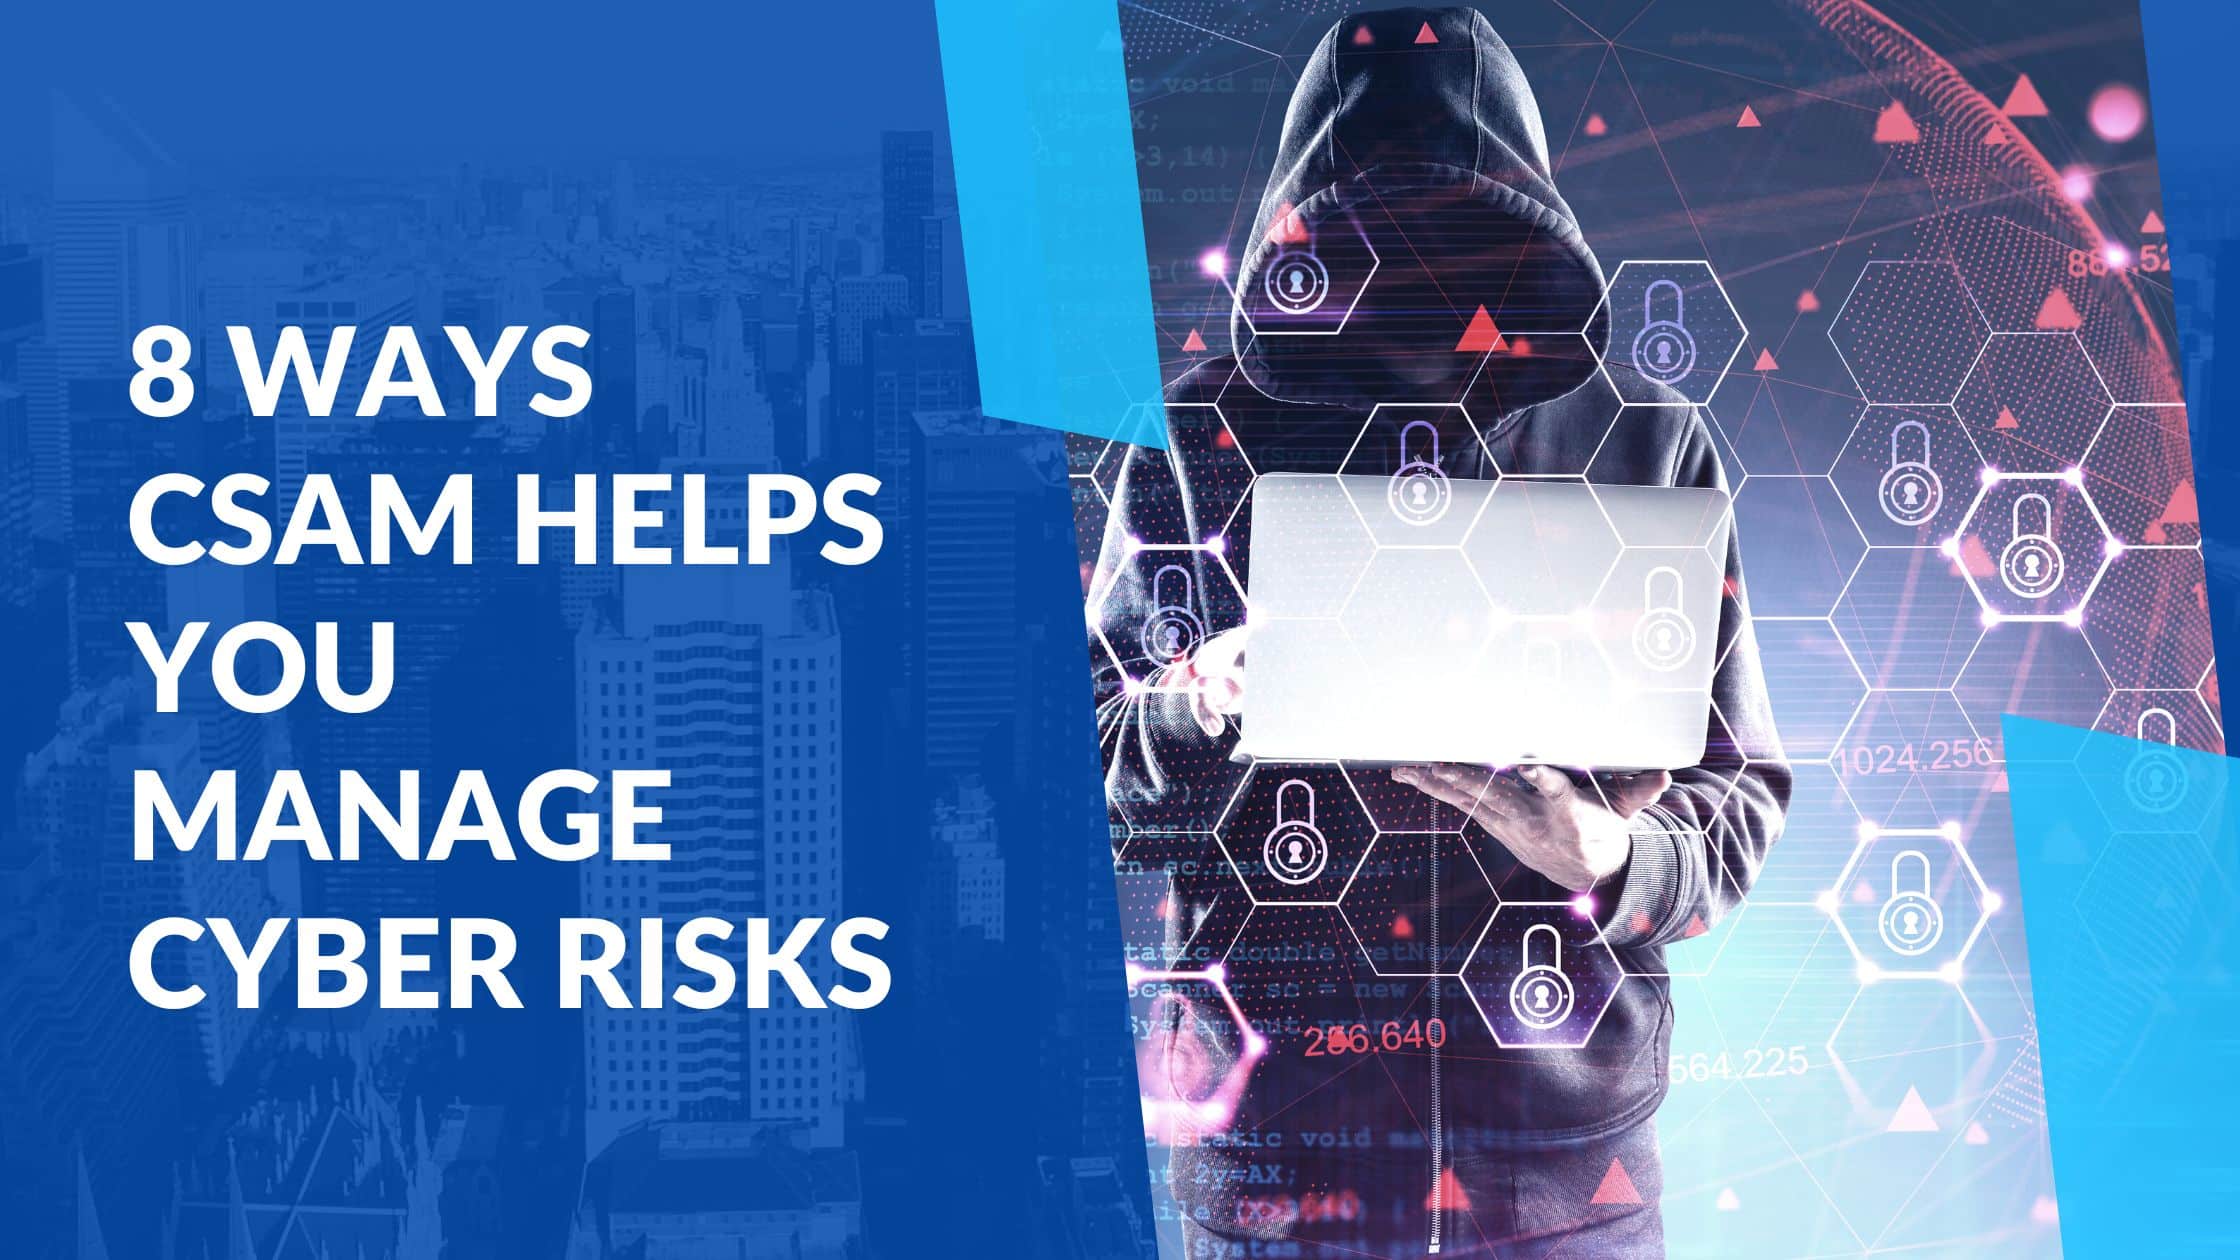 8 ways csam helps you manage cyber risks